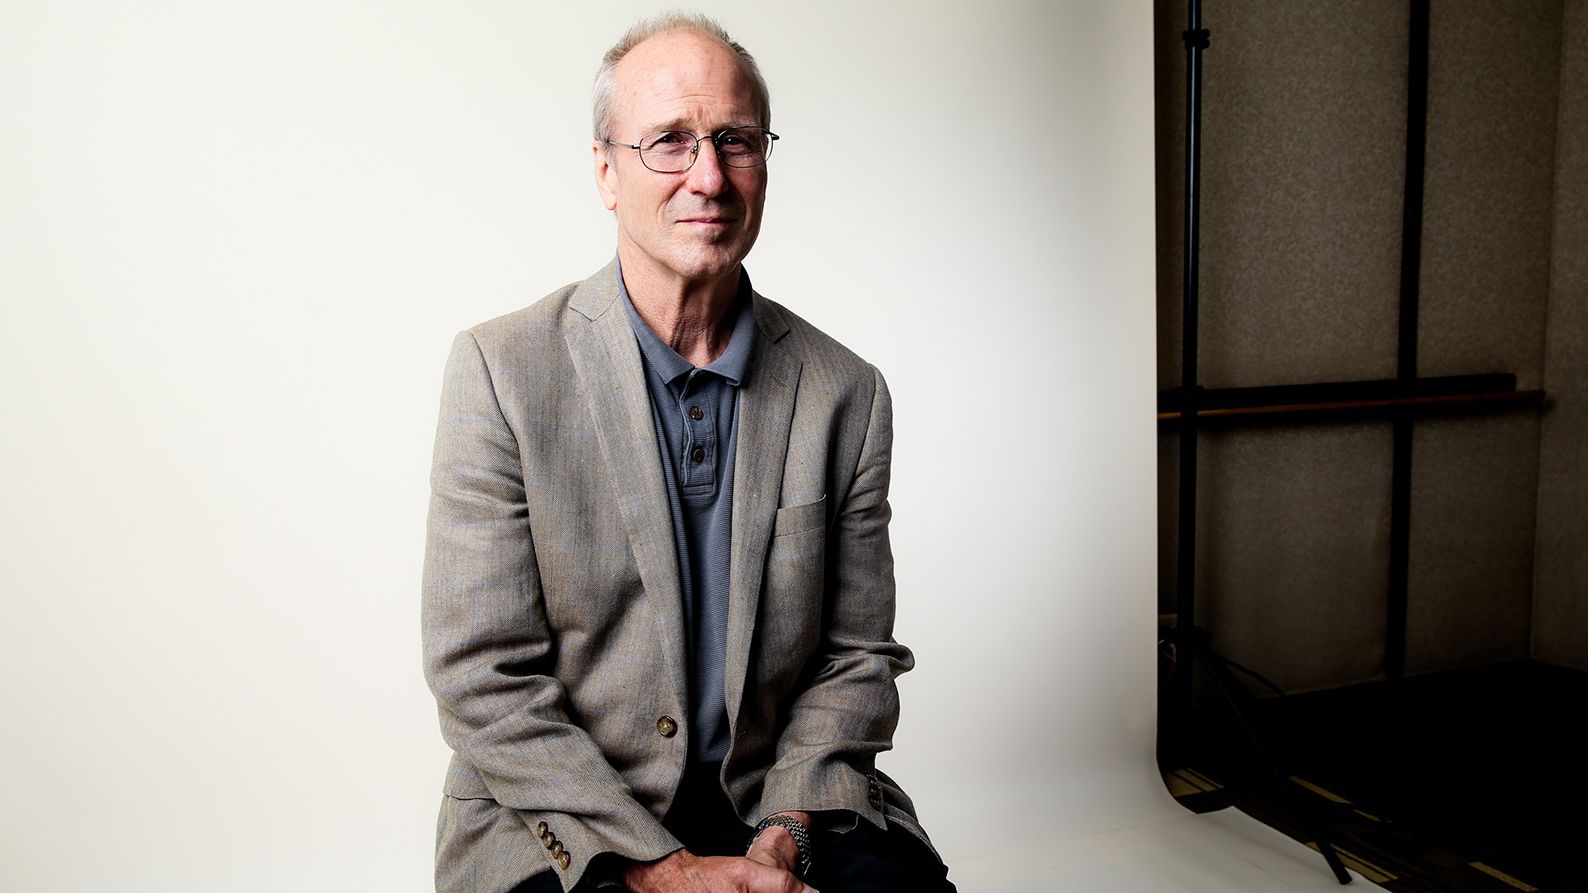 William Hurt poses for a picture during the 2016 Television Critics Association summer press tour.